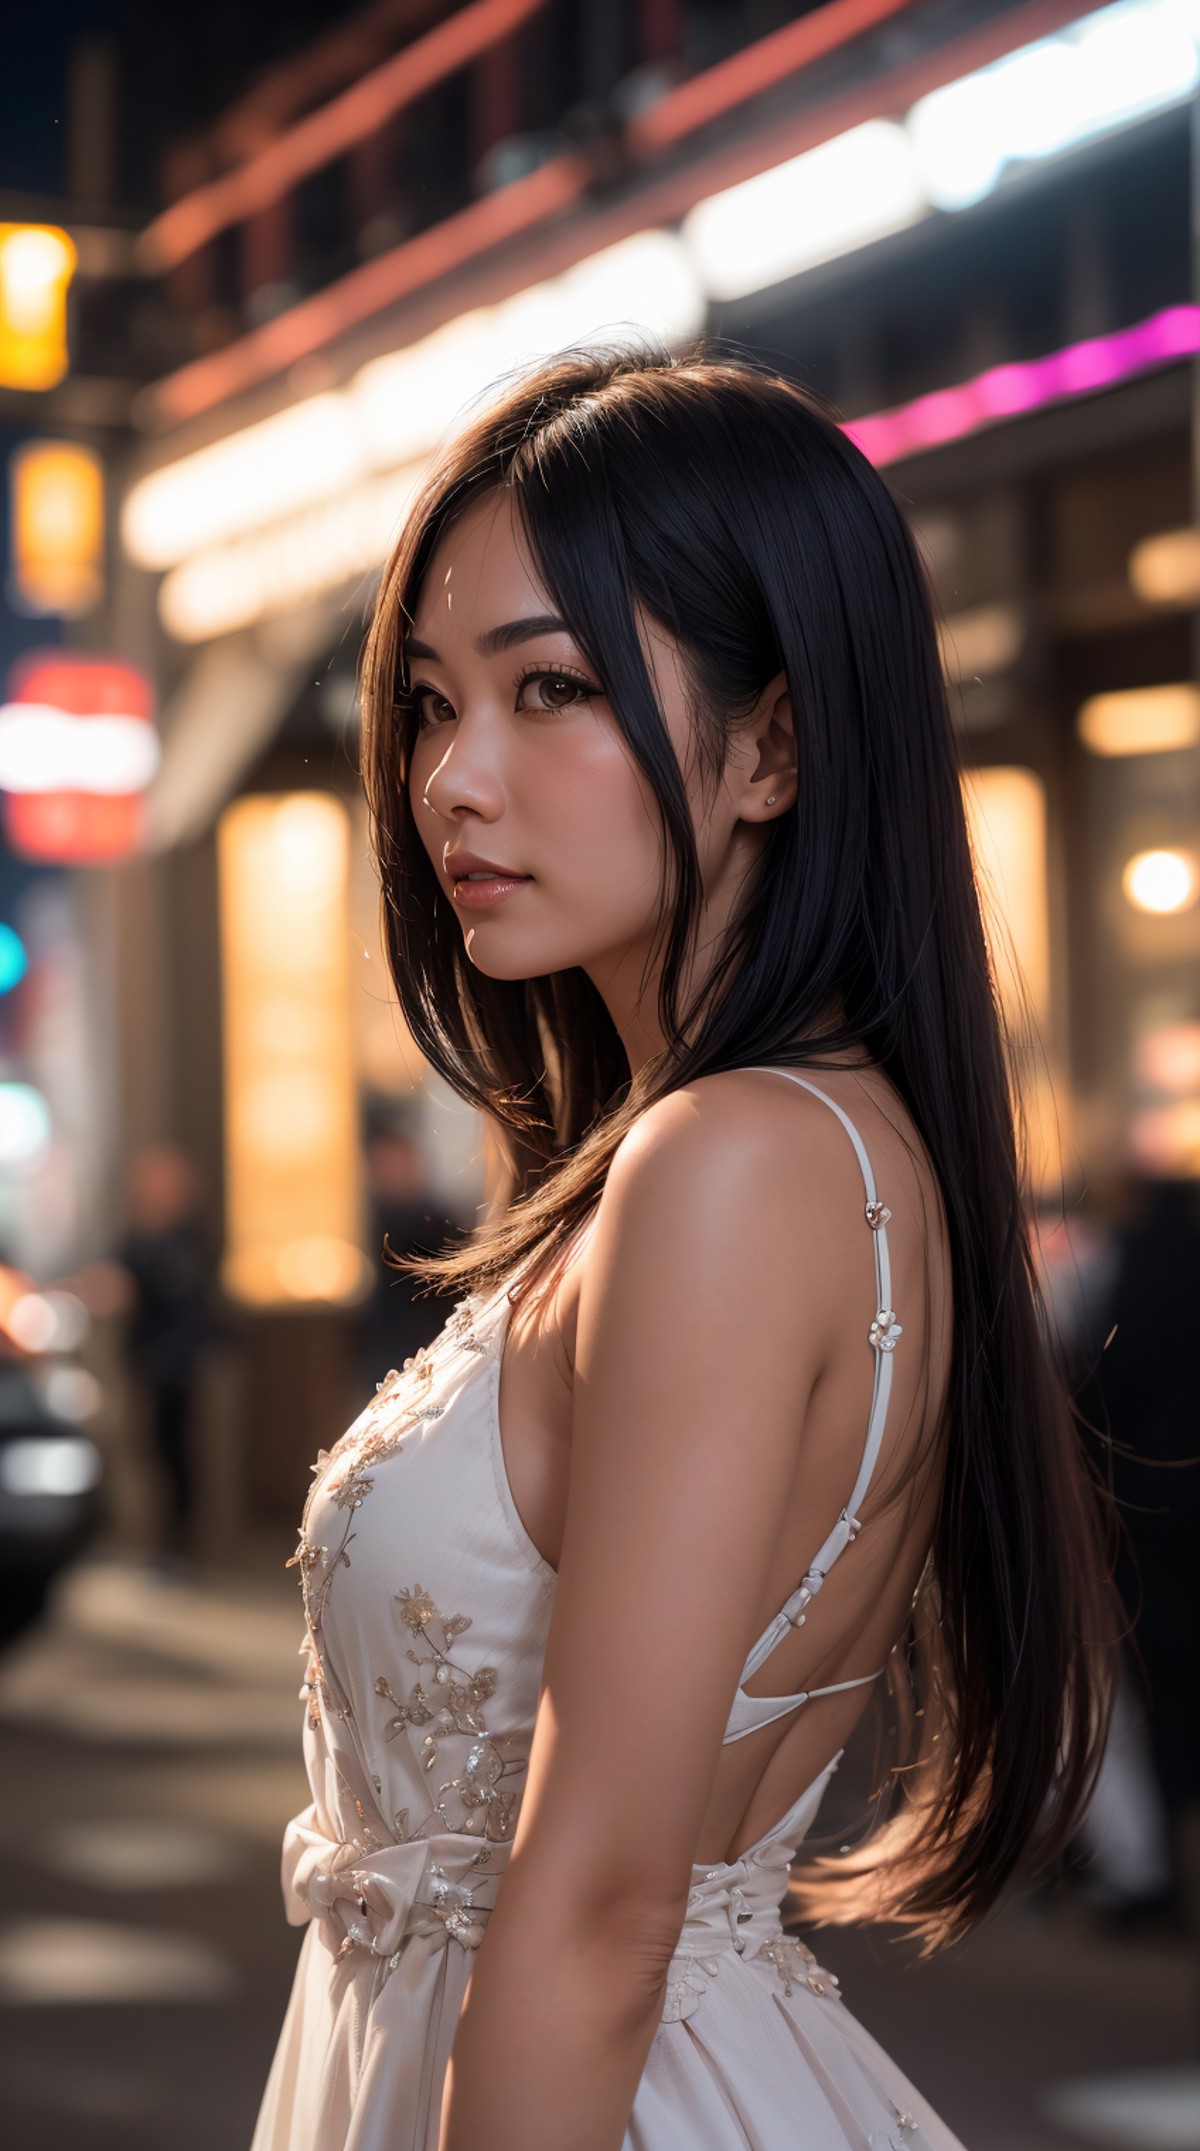 RAW photo, Vibrant Light trails, candid image of a Eurasian woman [Ashley|Mai] looking to the side, surrounded by multicol...